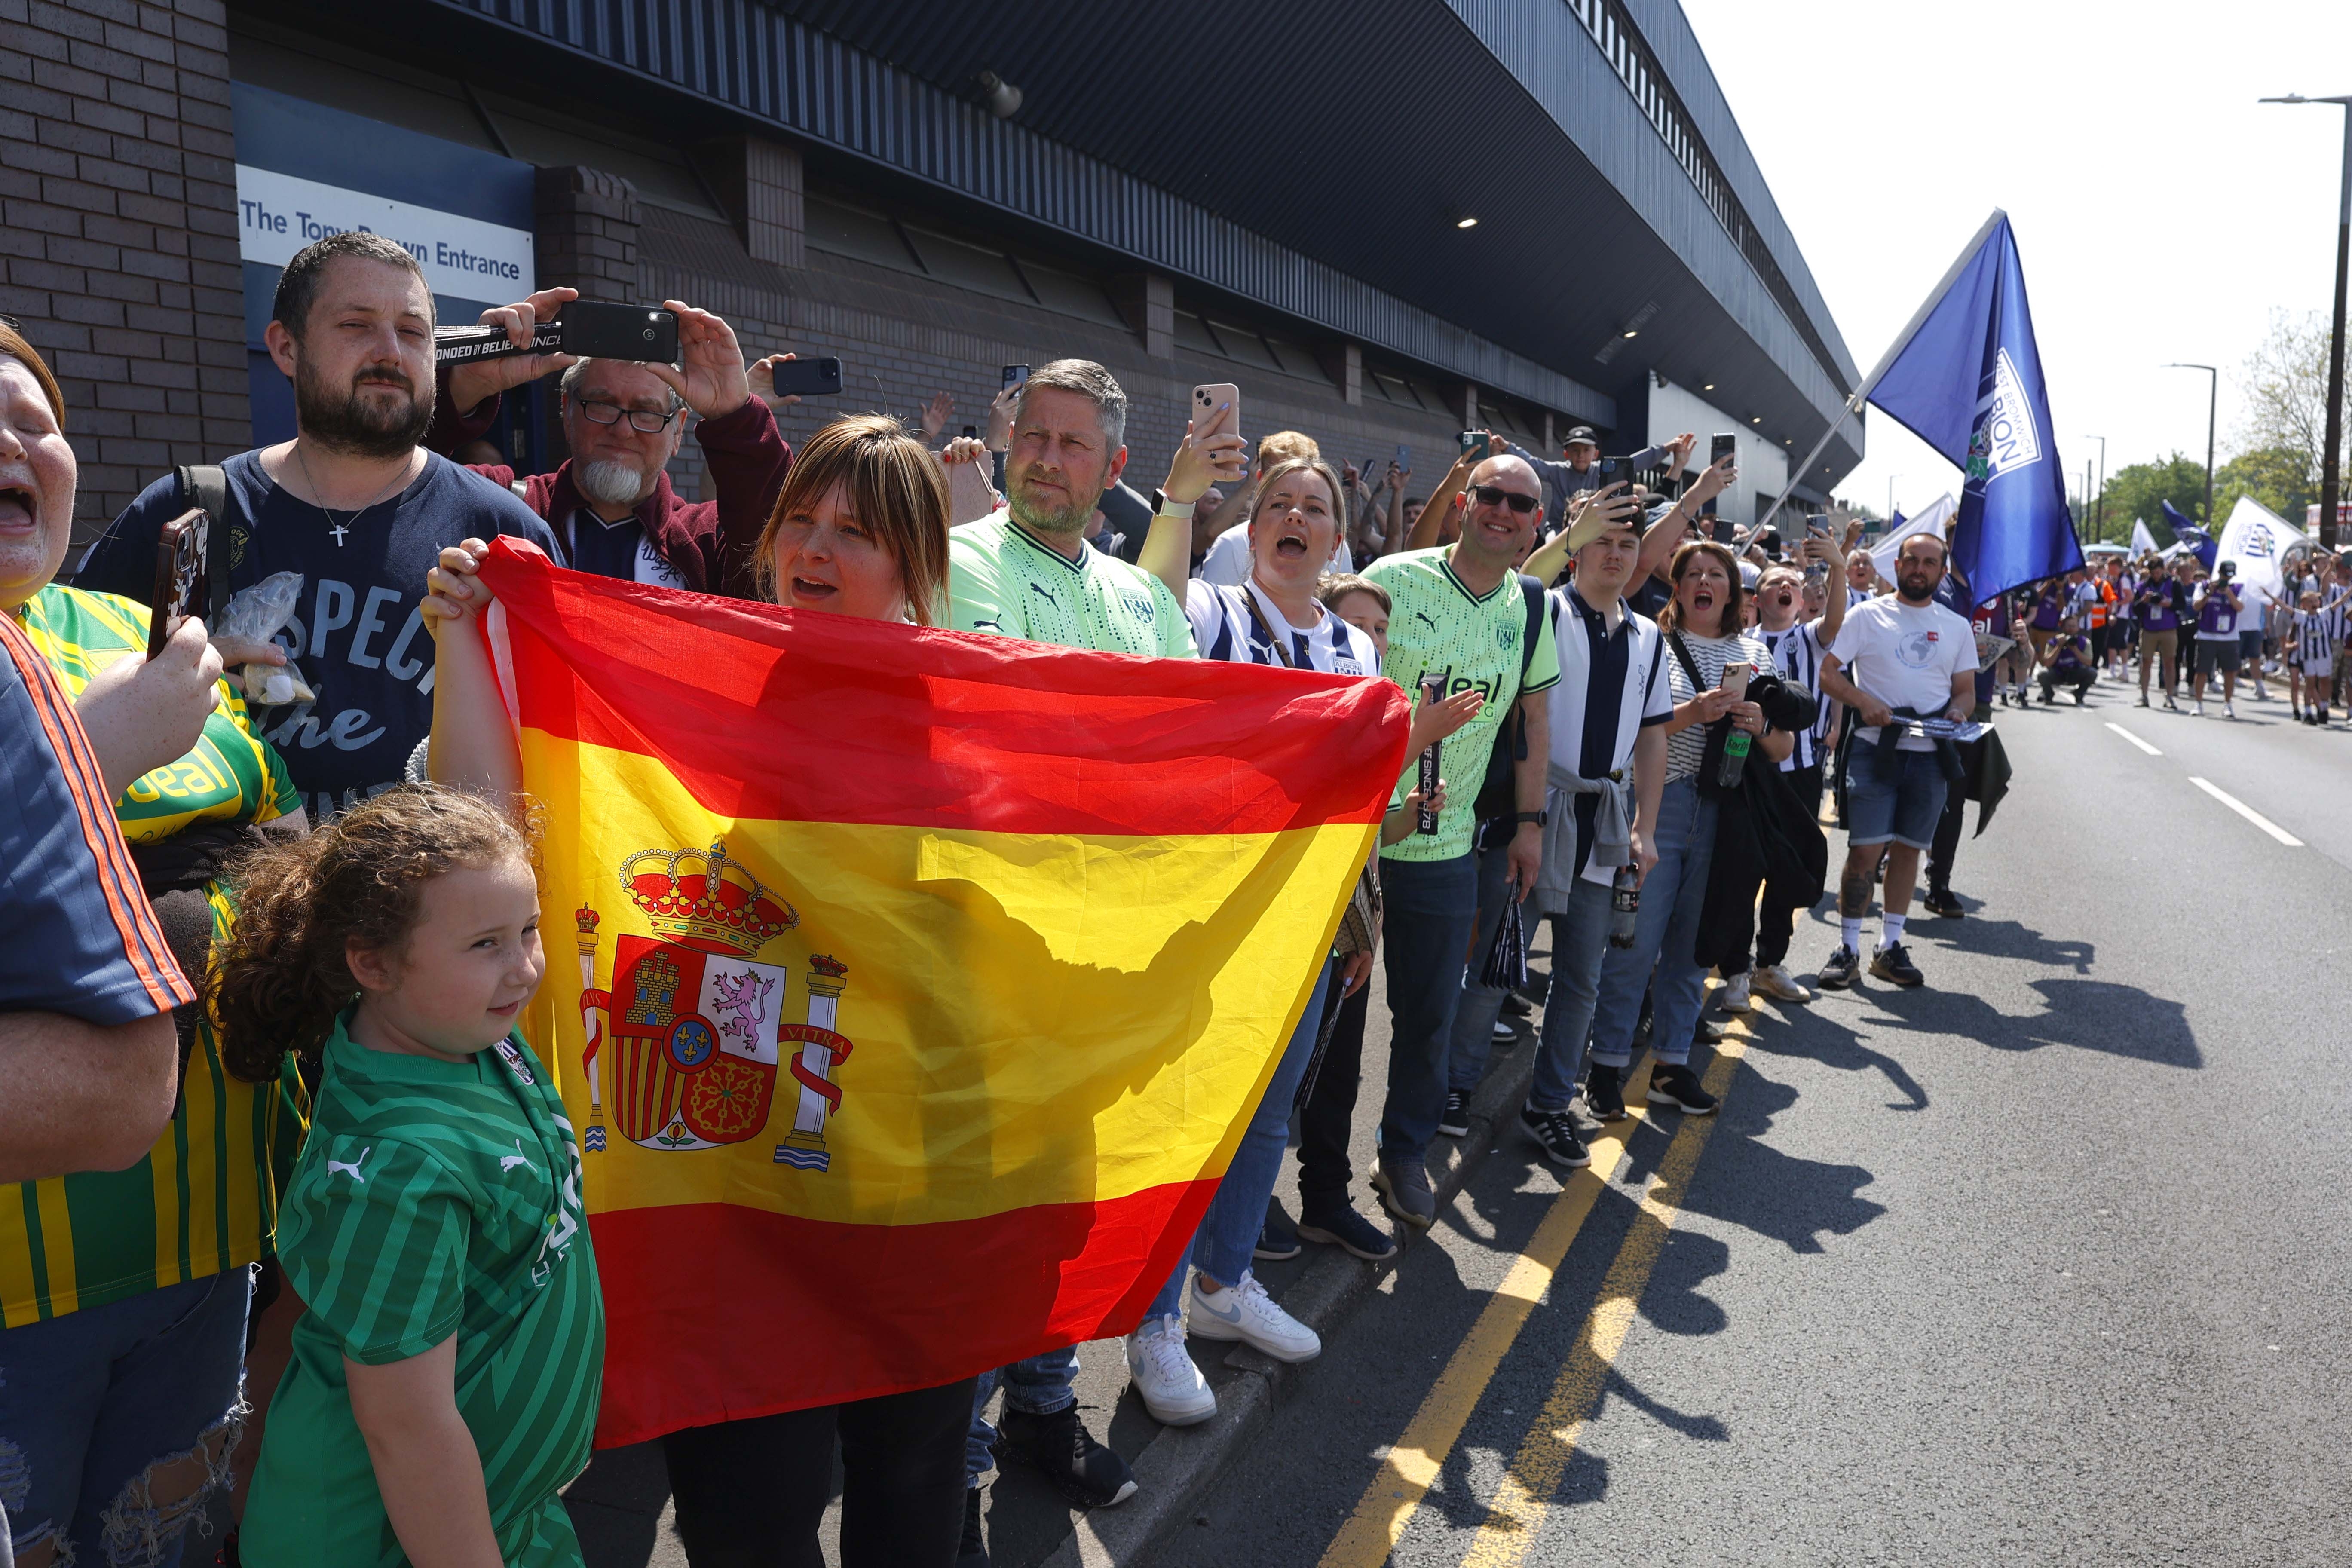 A general view of Albion supporters outside the stadium before the match against Southampton at The Hawthorns with one holding a Spain flag